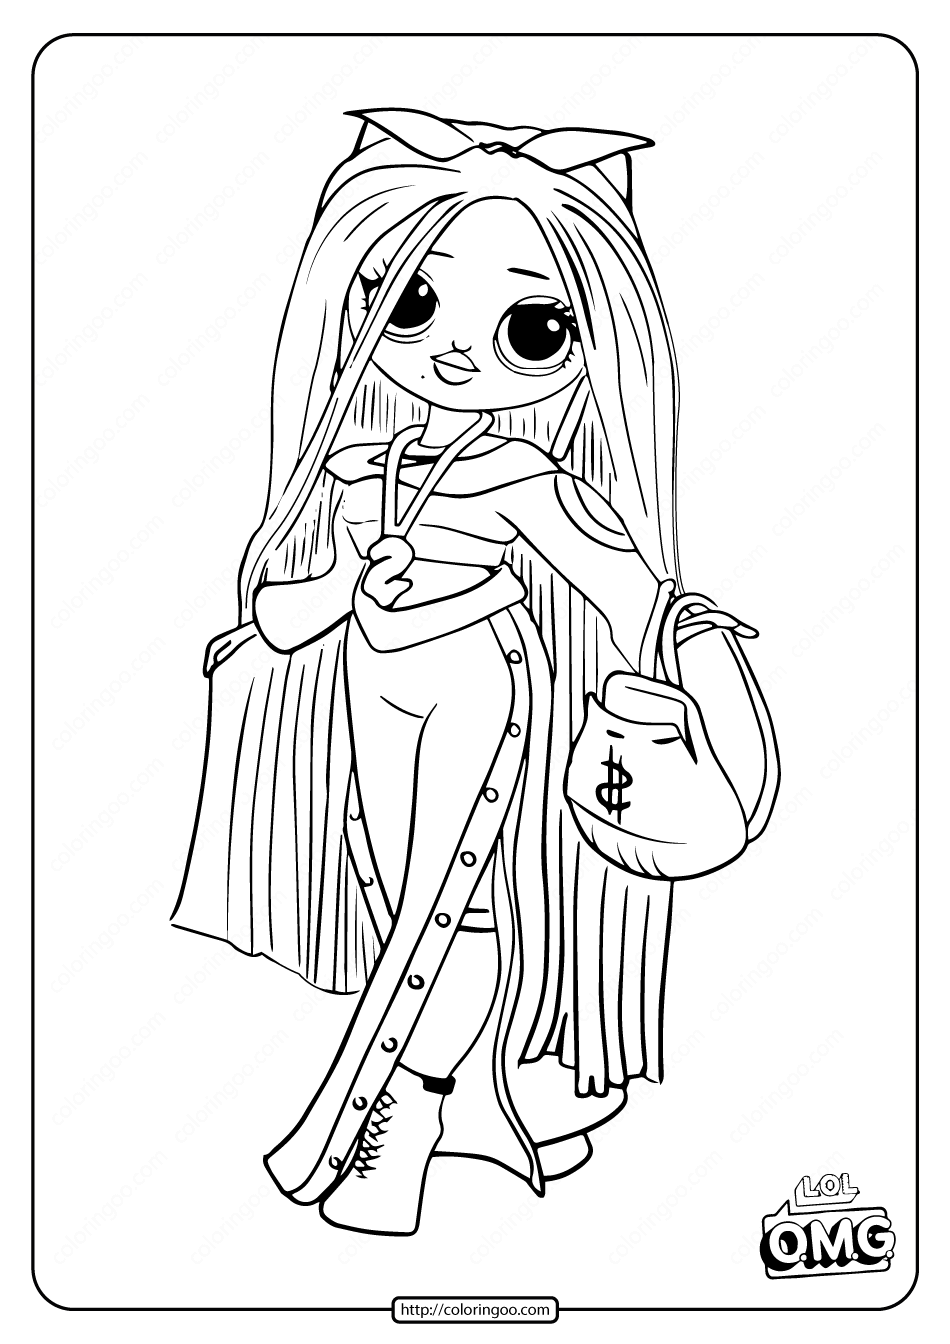 LOL Surprise OMG Swag Fashion Doll Coloring Page | Horse coloring pages,  Cool coloring pages, Coloring pages